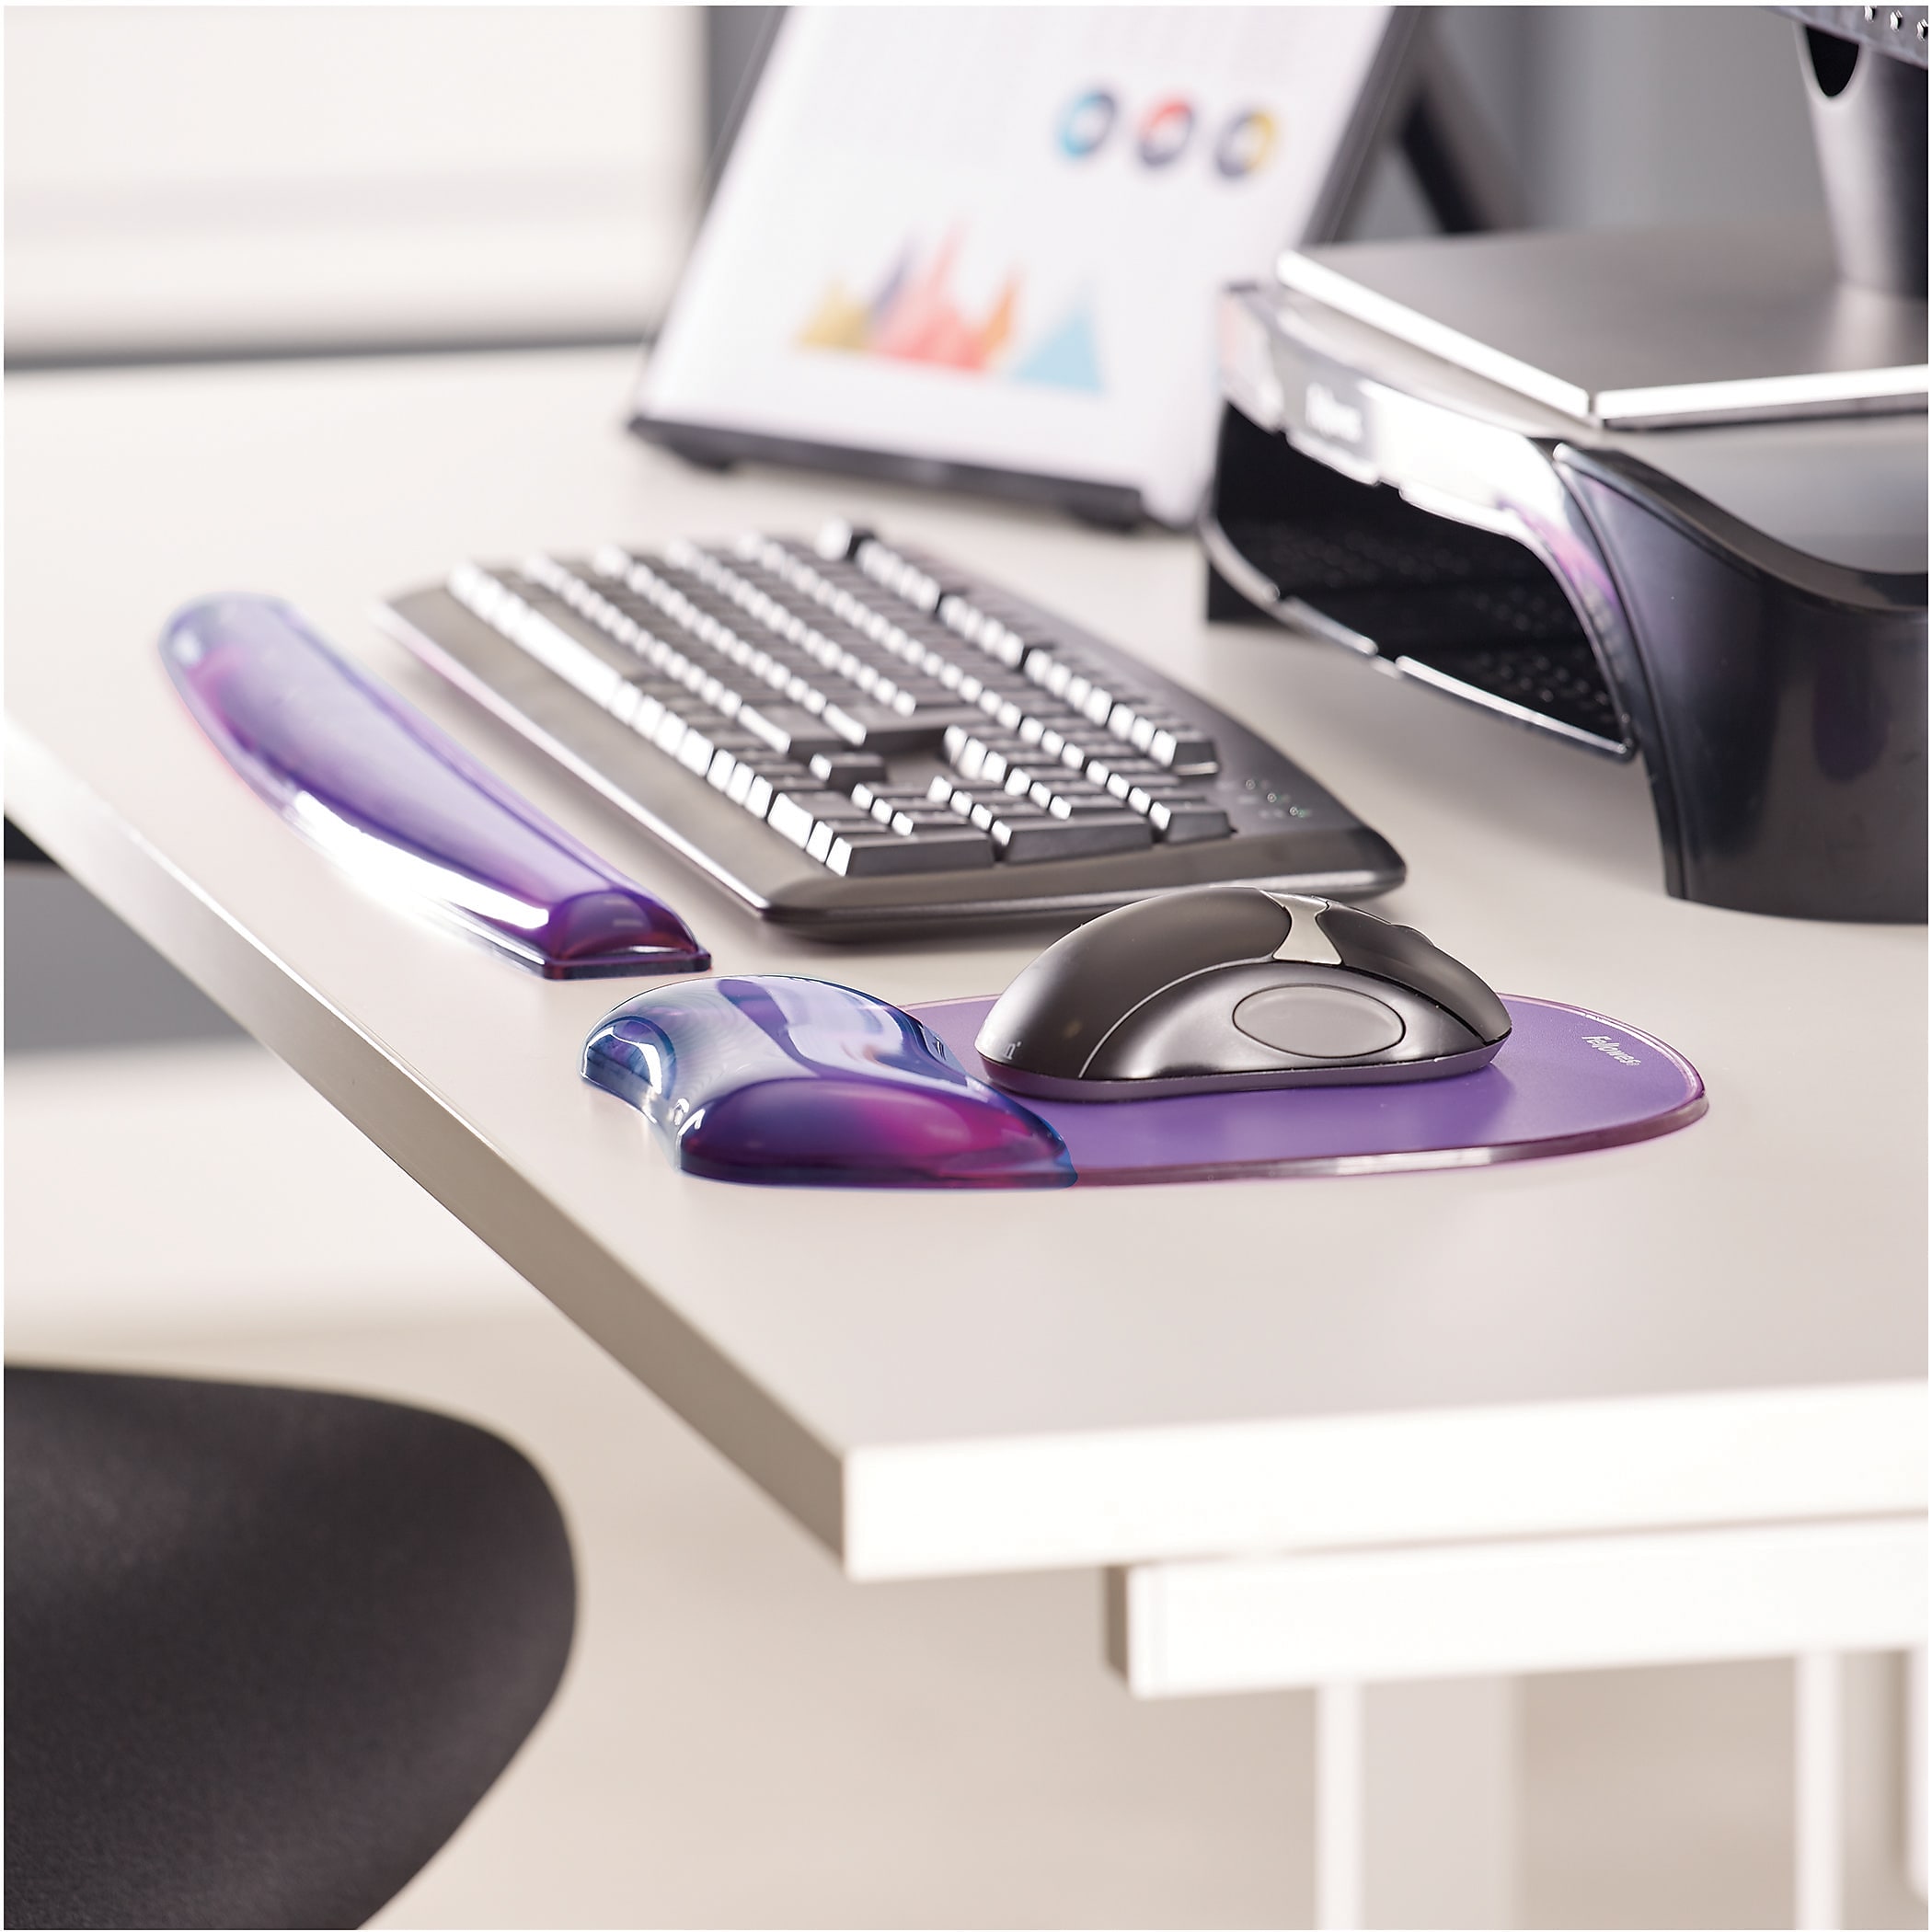 Fellowes 91441 Gel Crystals Mousepad/Wrist Rest - Purple - image 4 of 4